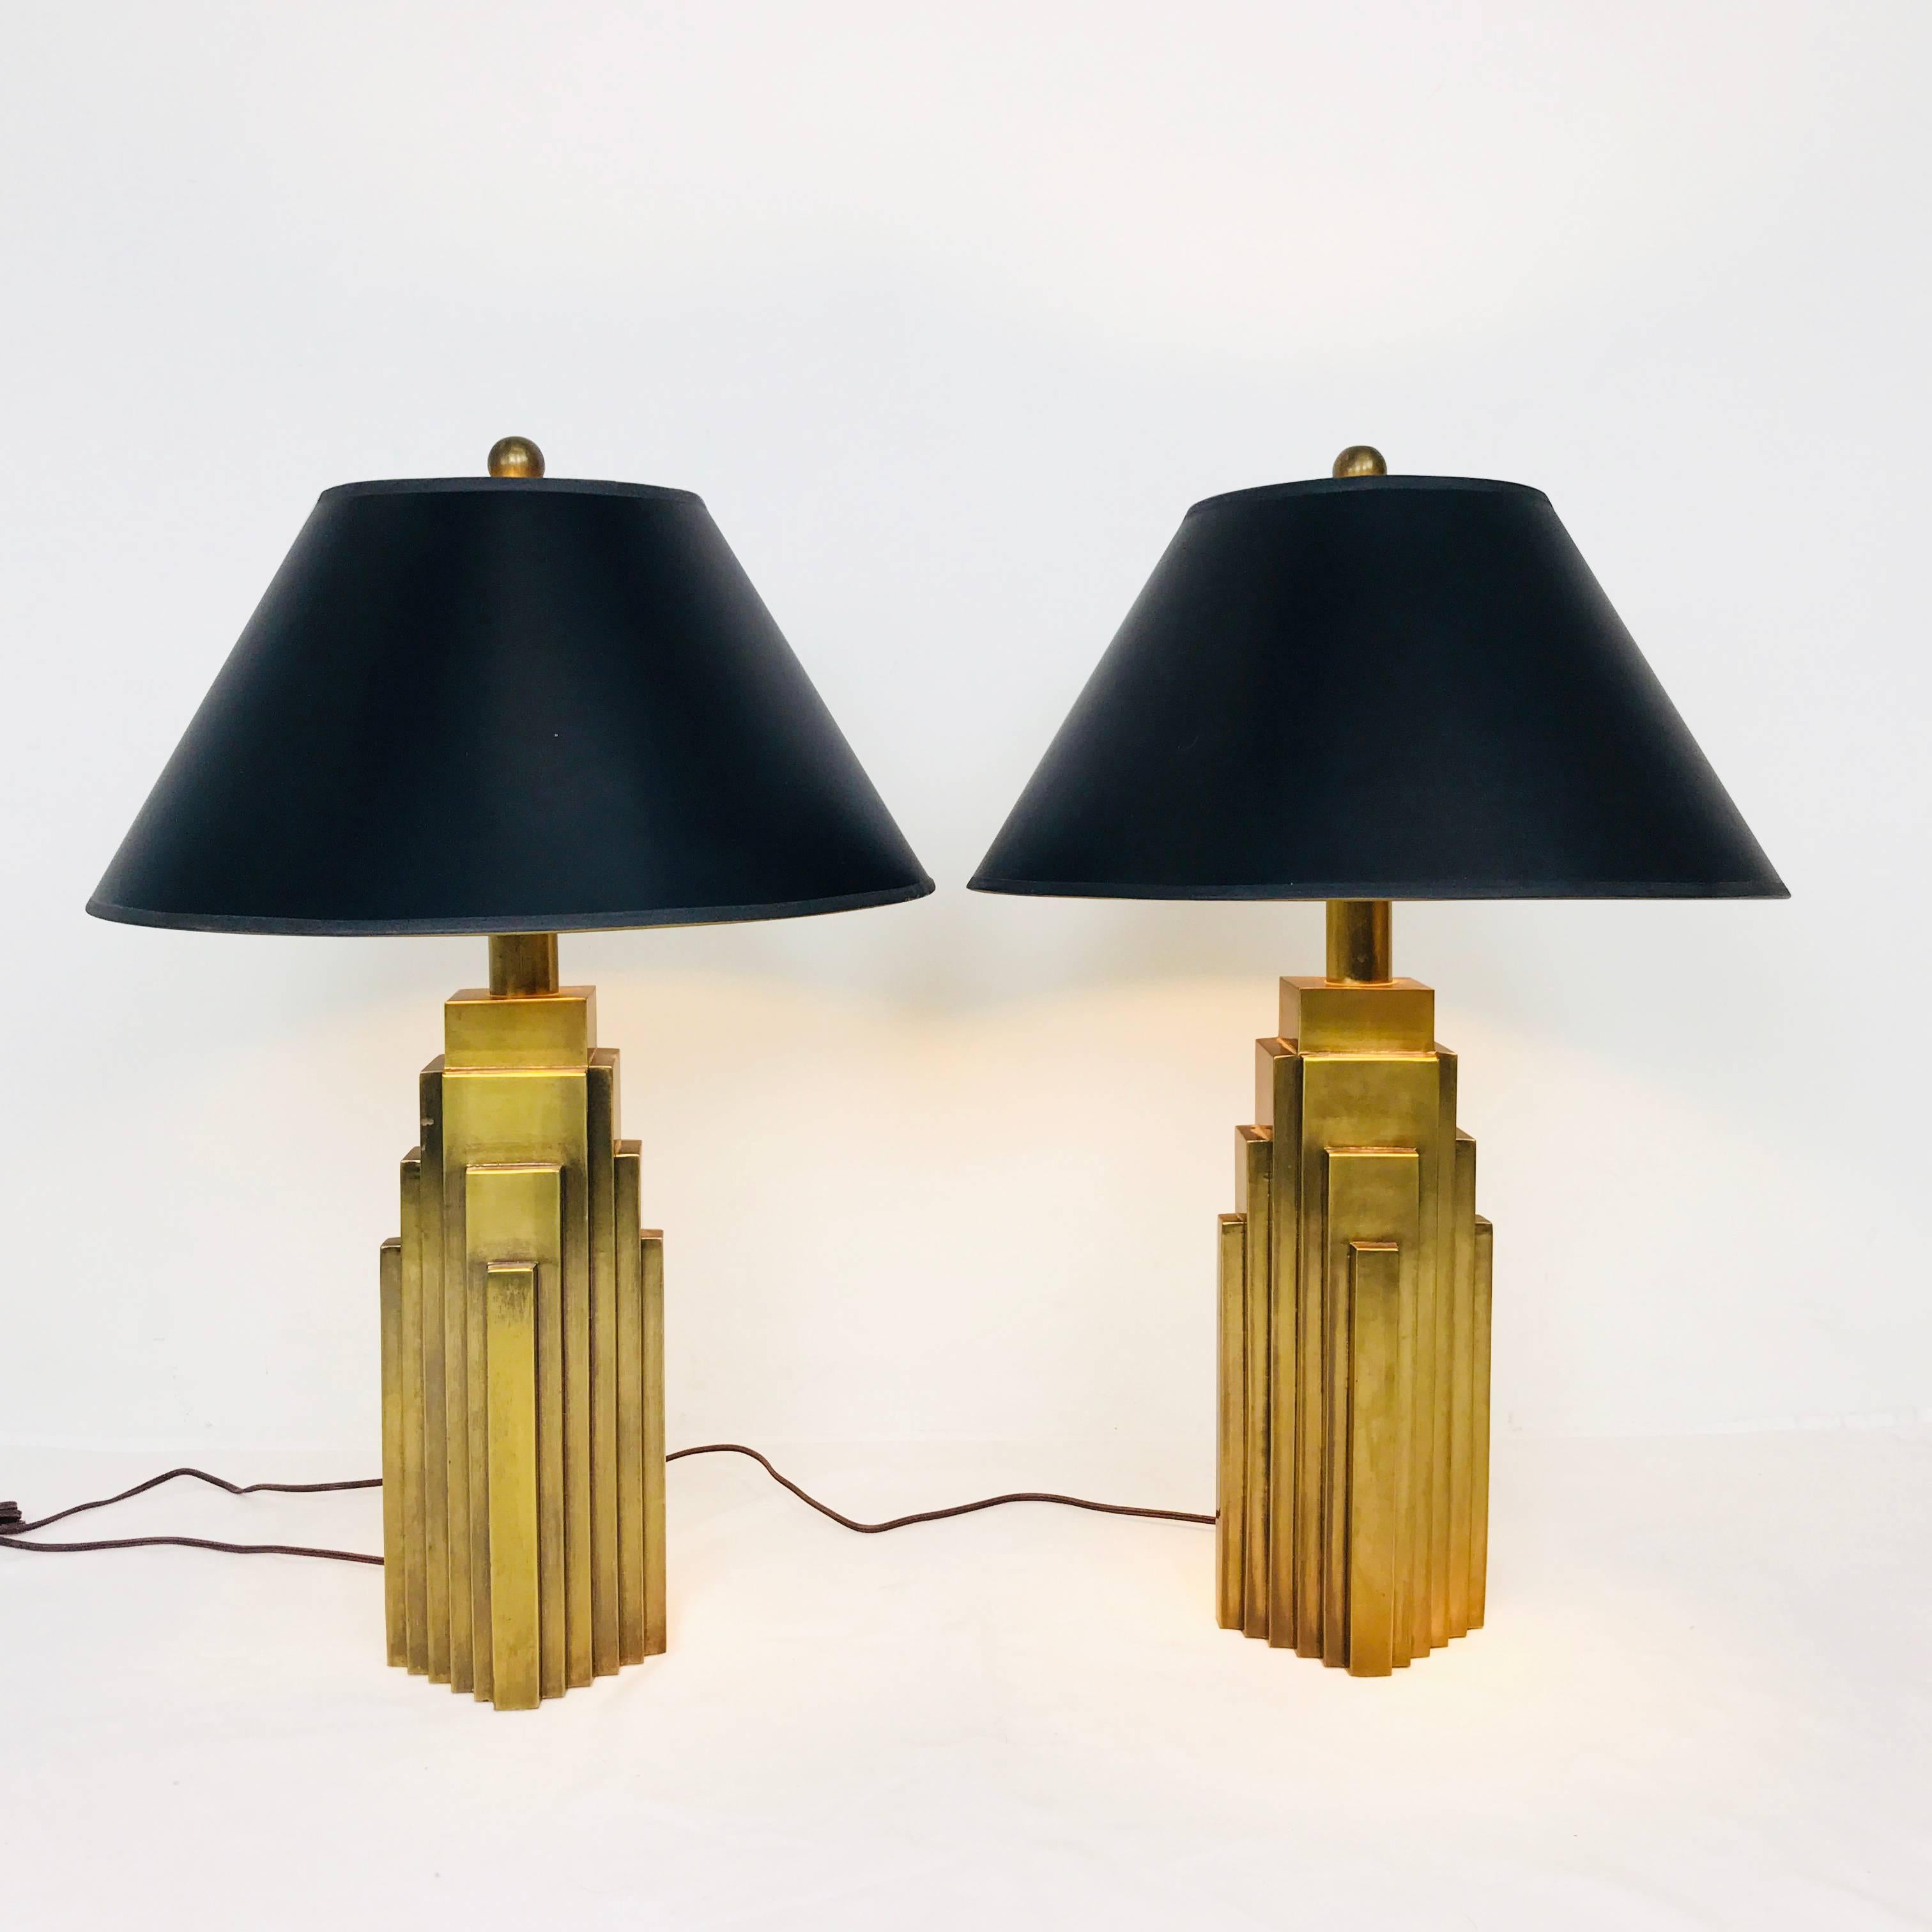 Pair of brass Skyscraper table lamps with black shades by Chapman. Lamps are in good vintage condition.

Dimensions: 6.5